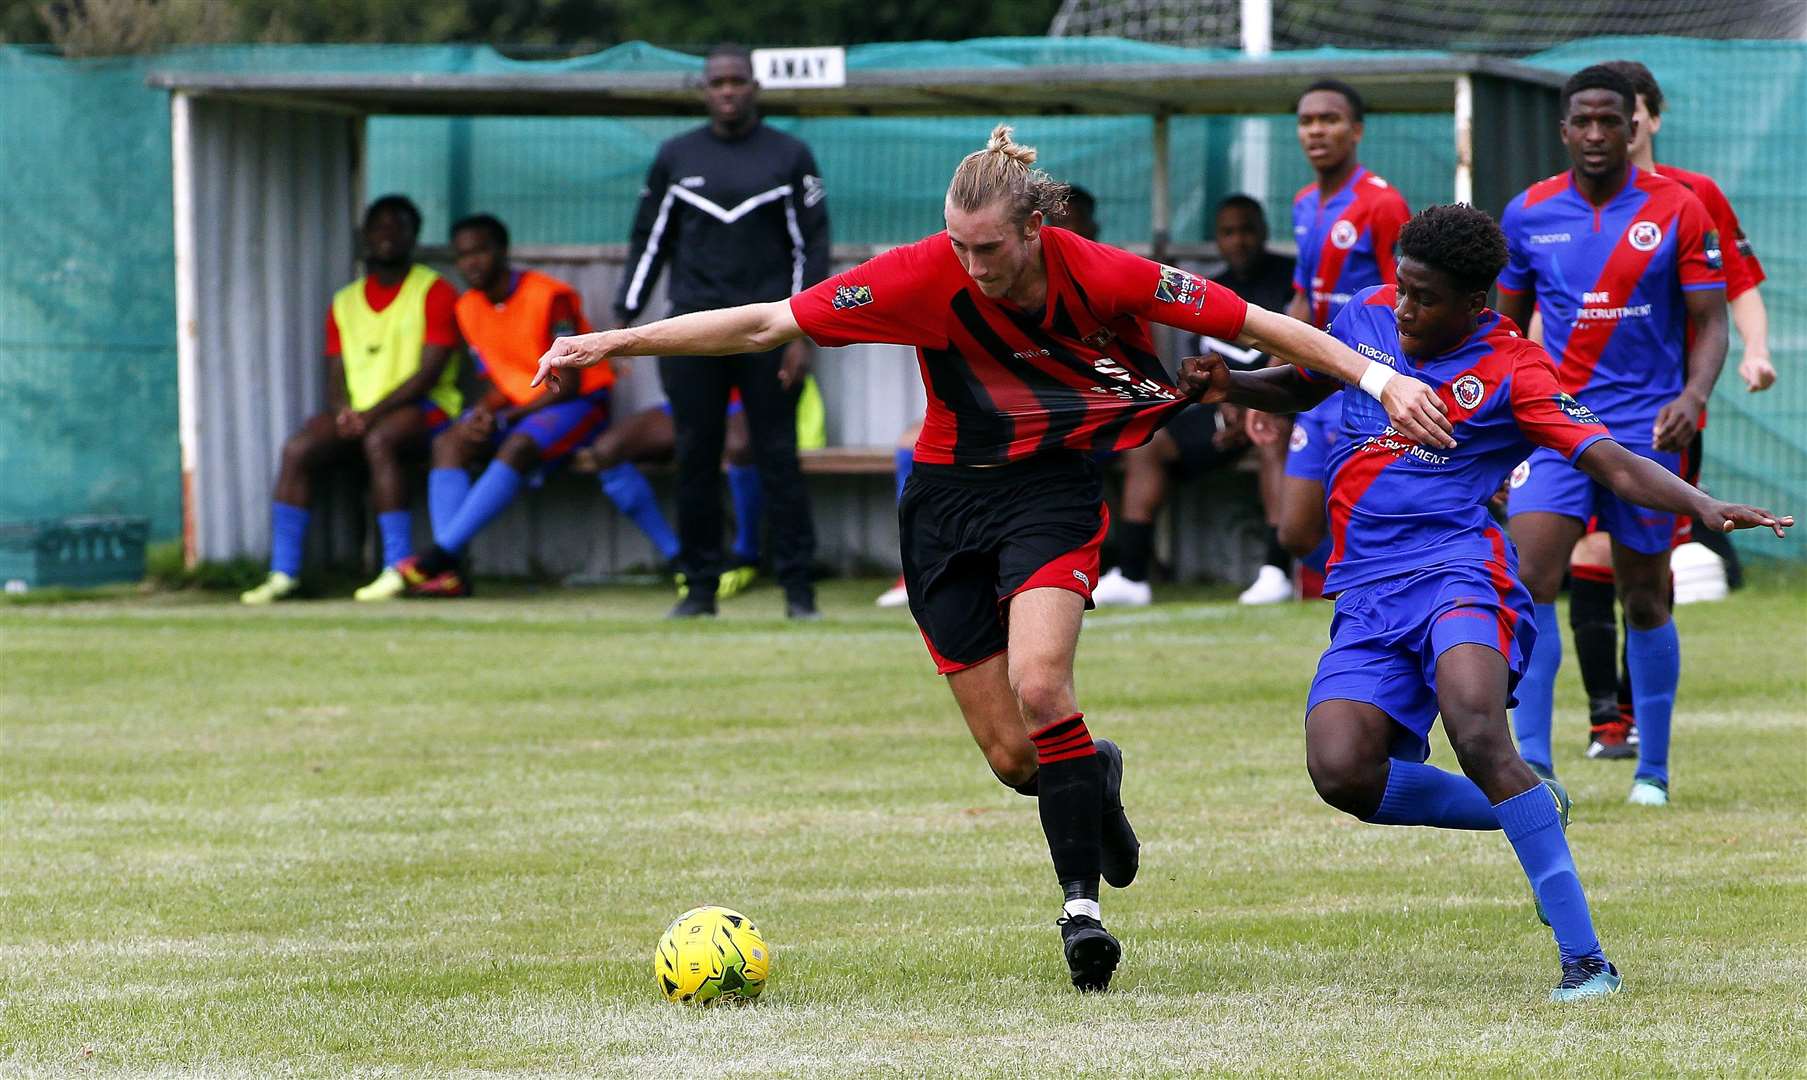 Sittingbourne play their home matches at Woodstock Park